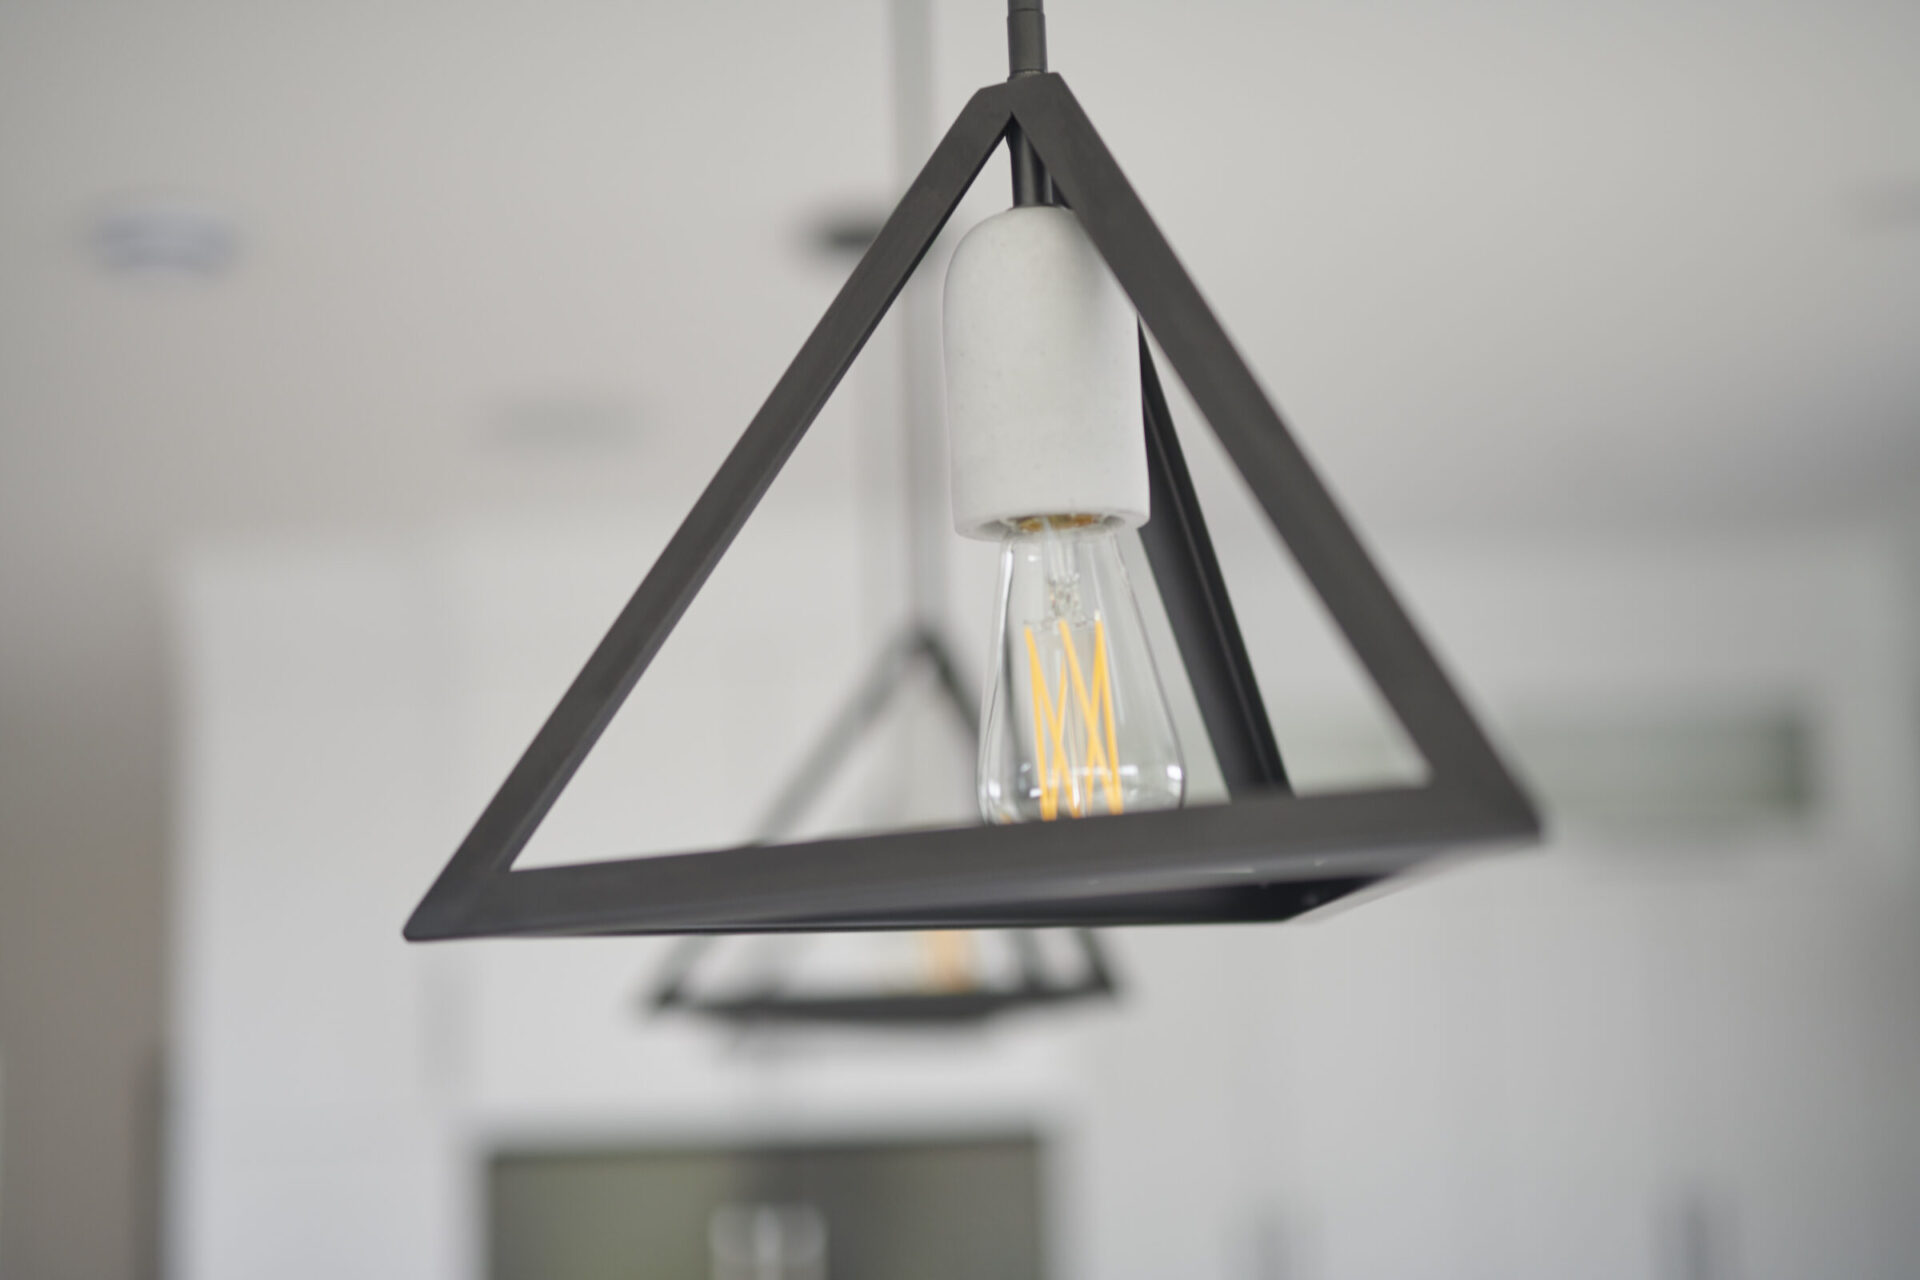 A modern pendant light with a geometric black metal frame hangs indoors. An Edison bulb glows softly against a blurred white interior background.